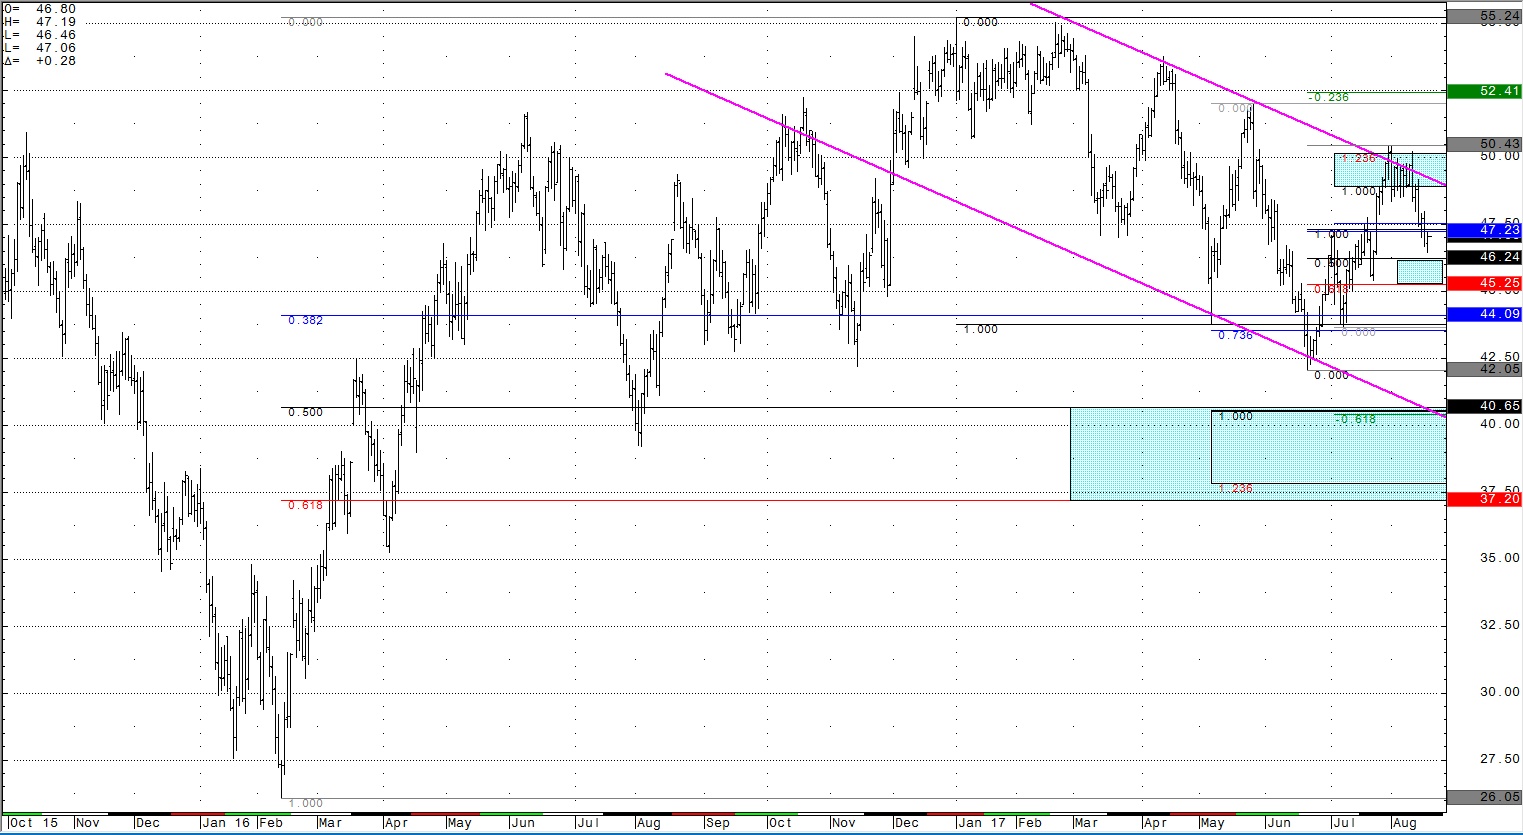 Crude Light Daily Continuous Chart